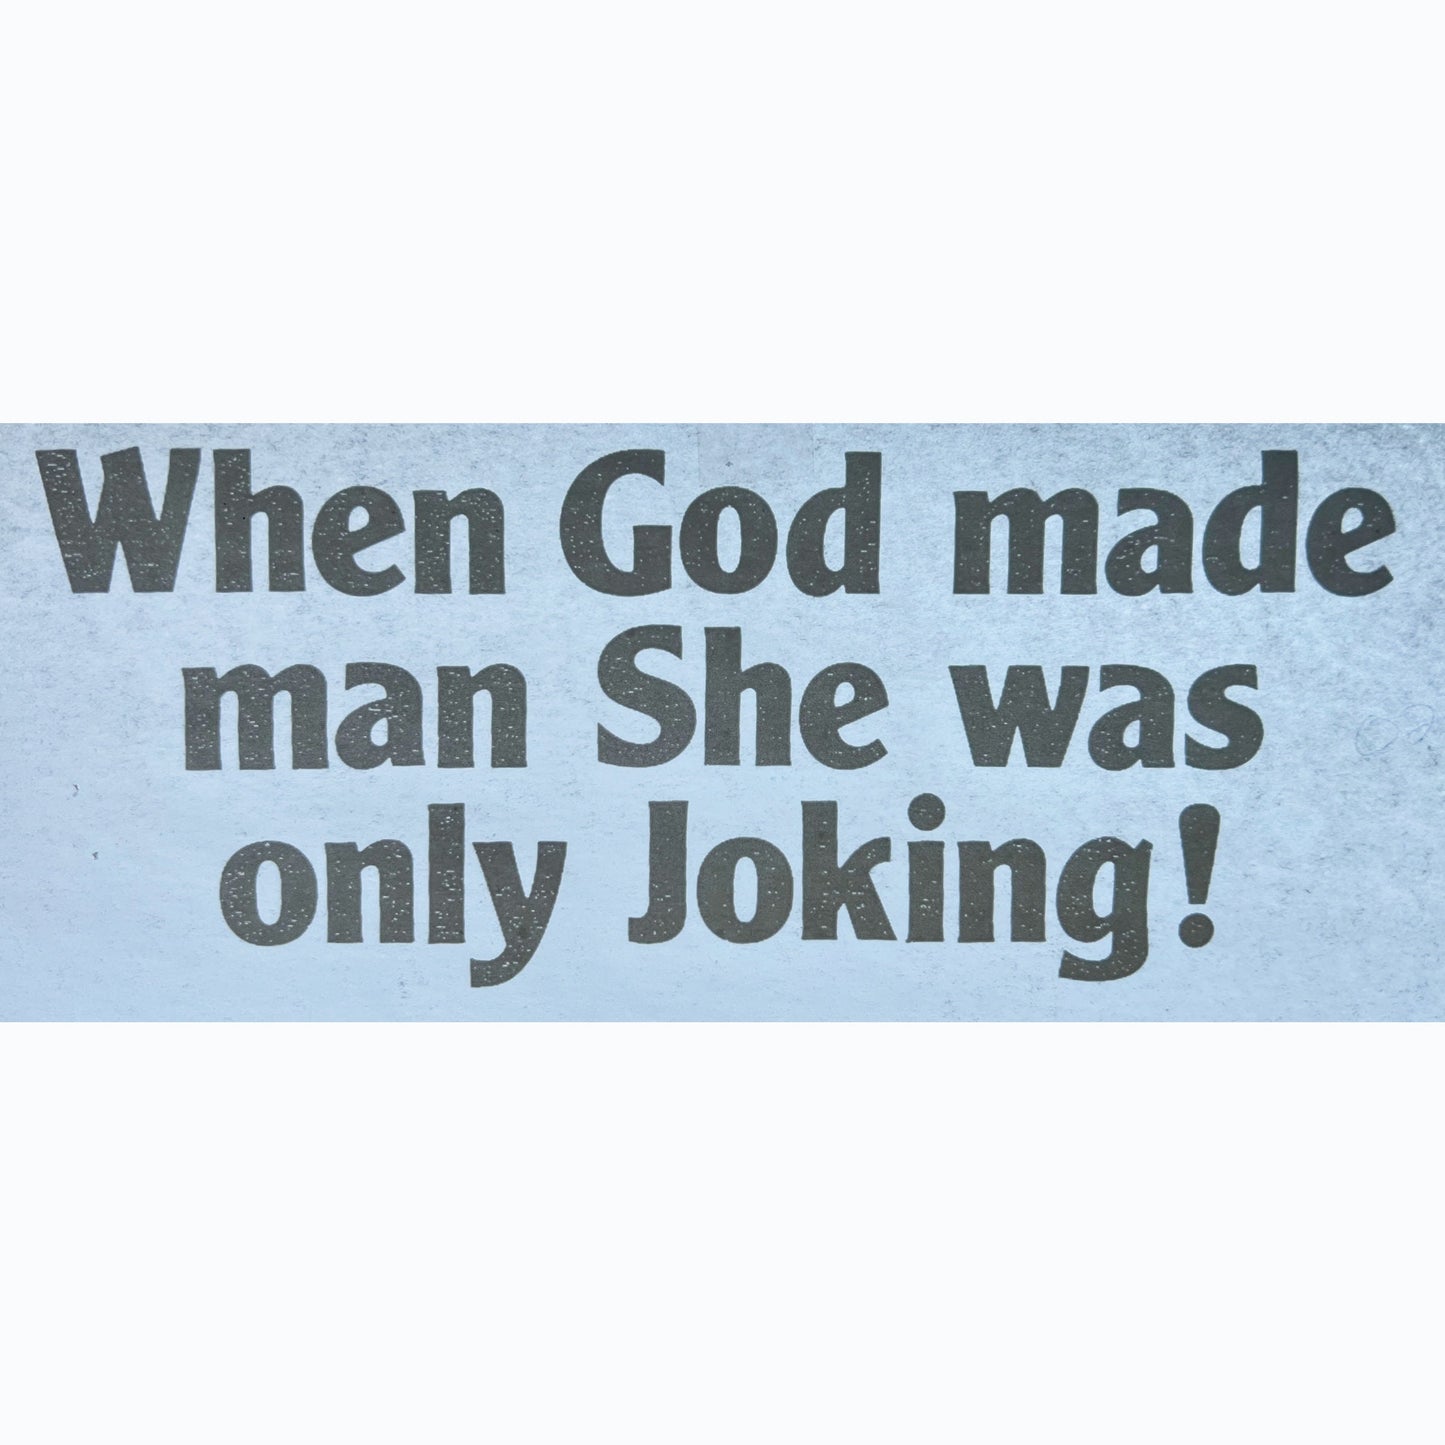 When God Made Man She Was Only Joking! Vintage Iron On Heat Transfer